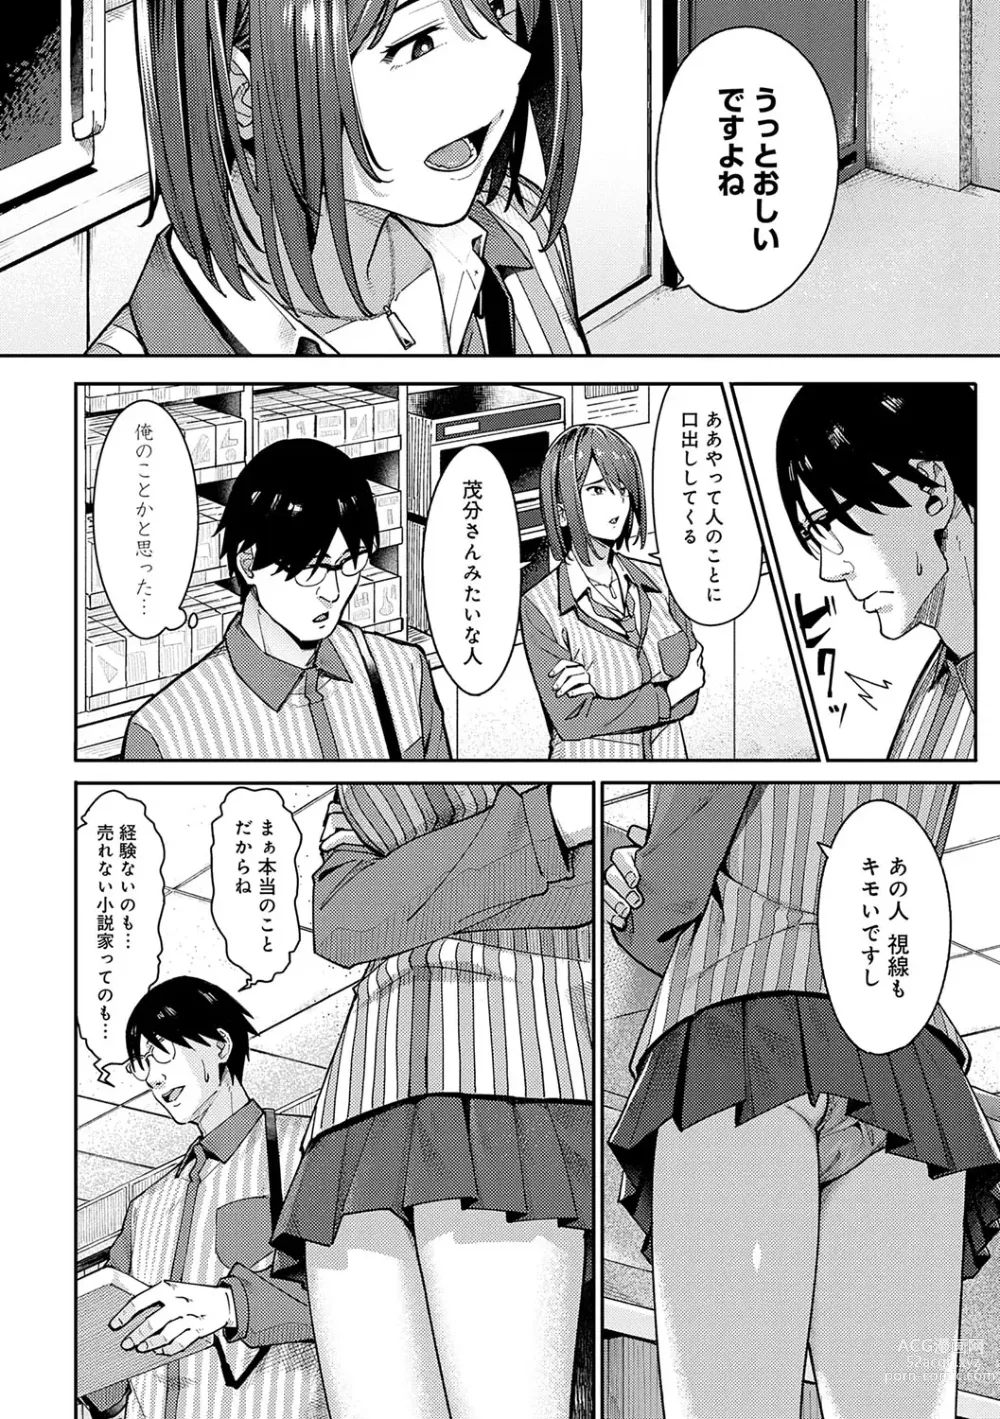 Page 7 of manga Toriaezu, Yattemiyo. - Lets have sex for now.